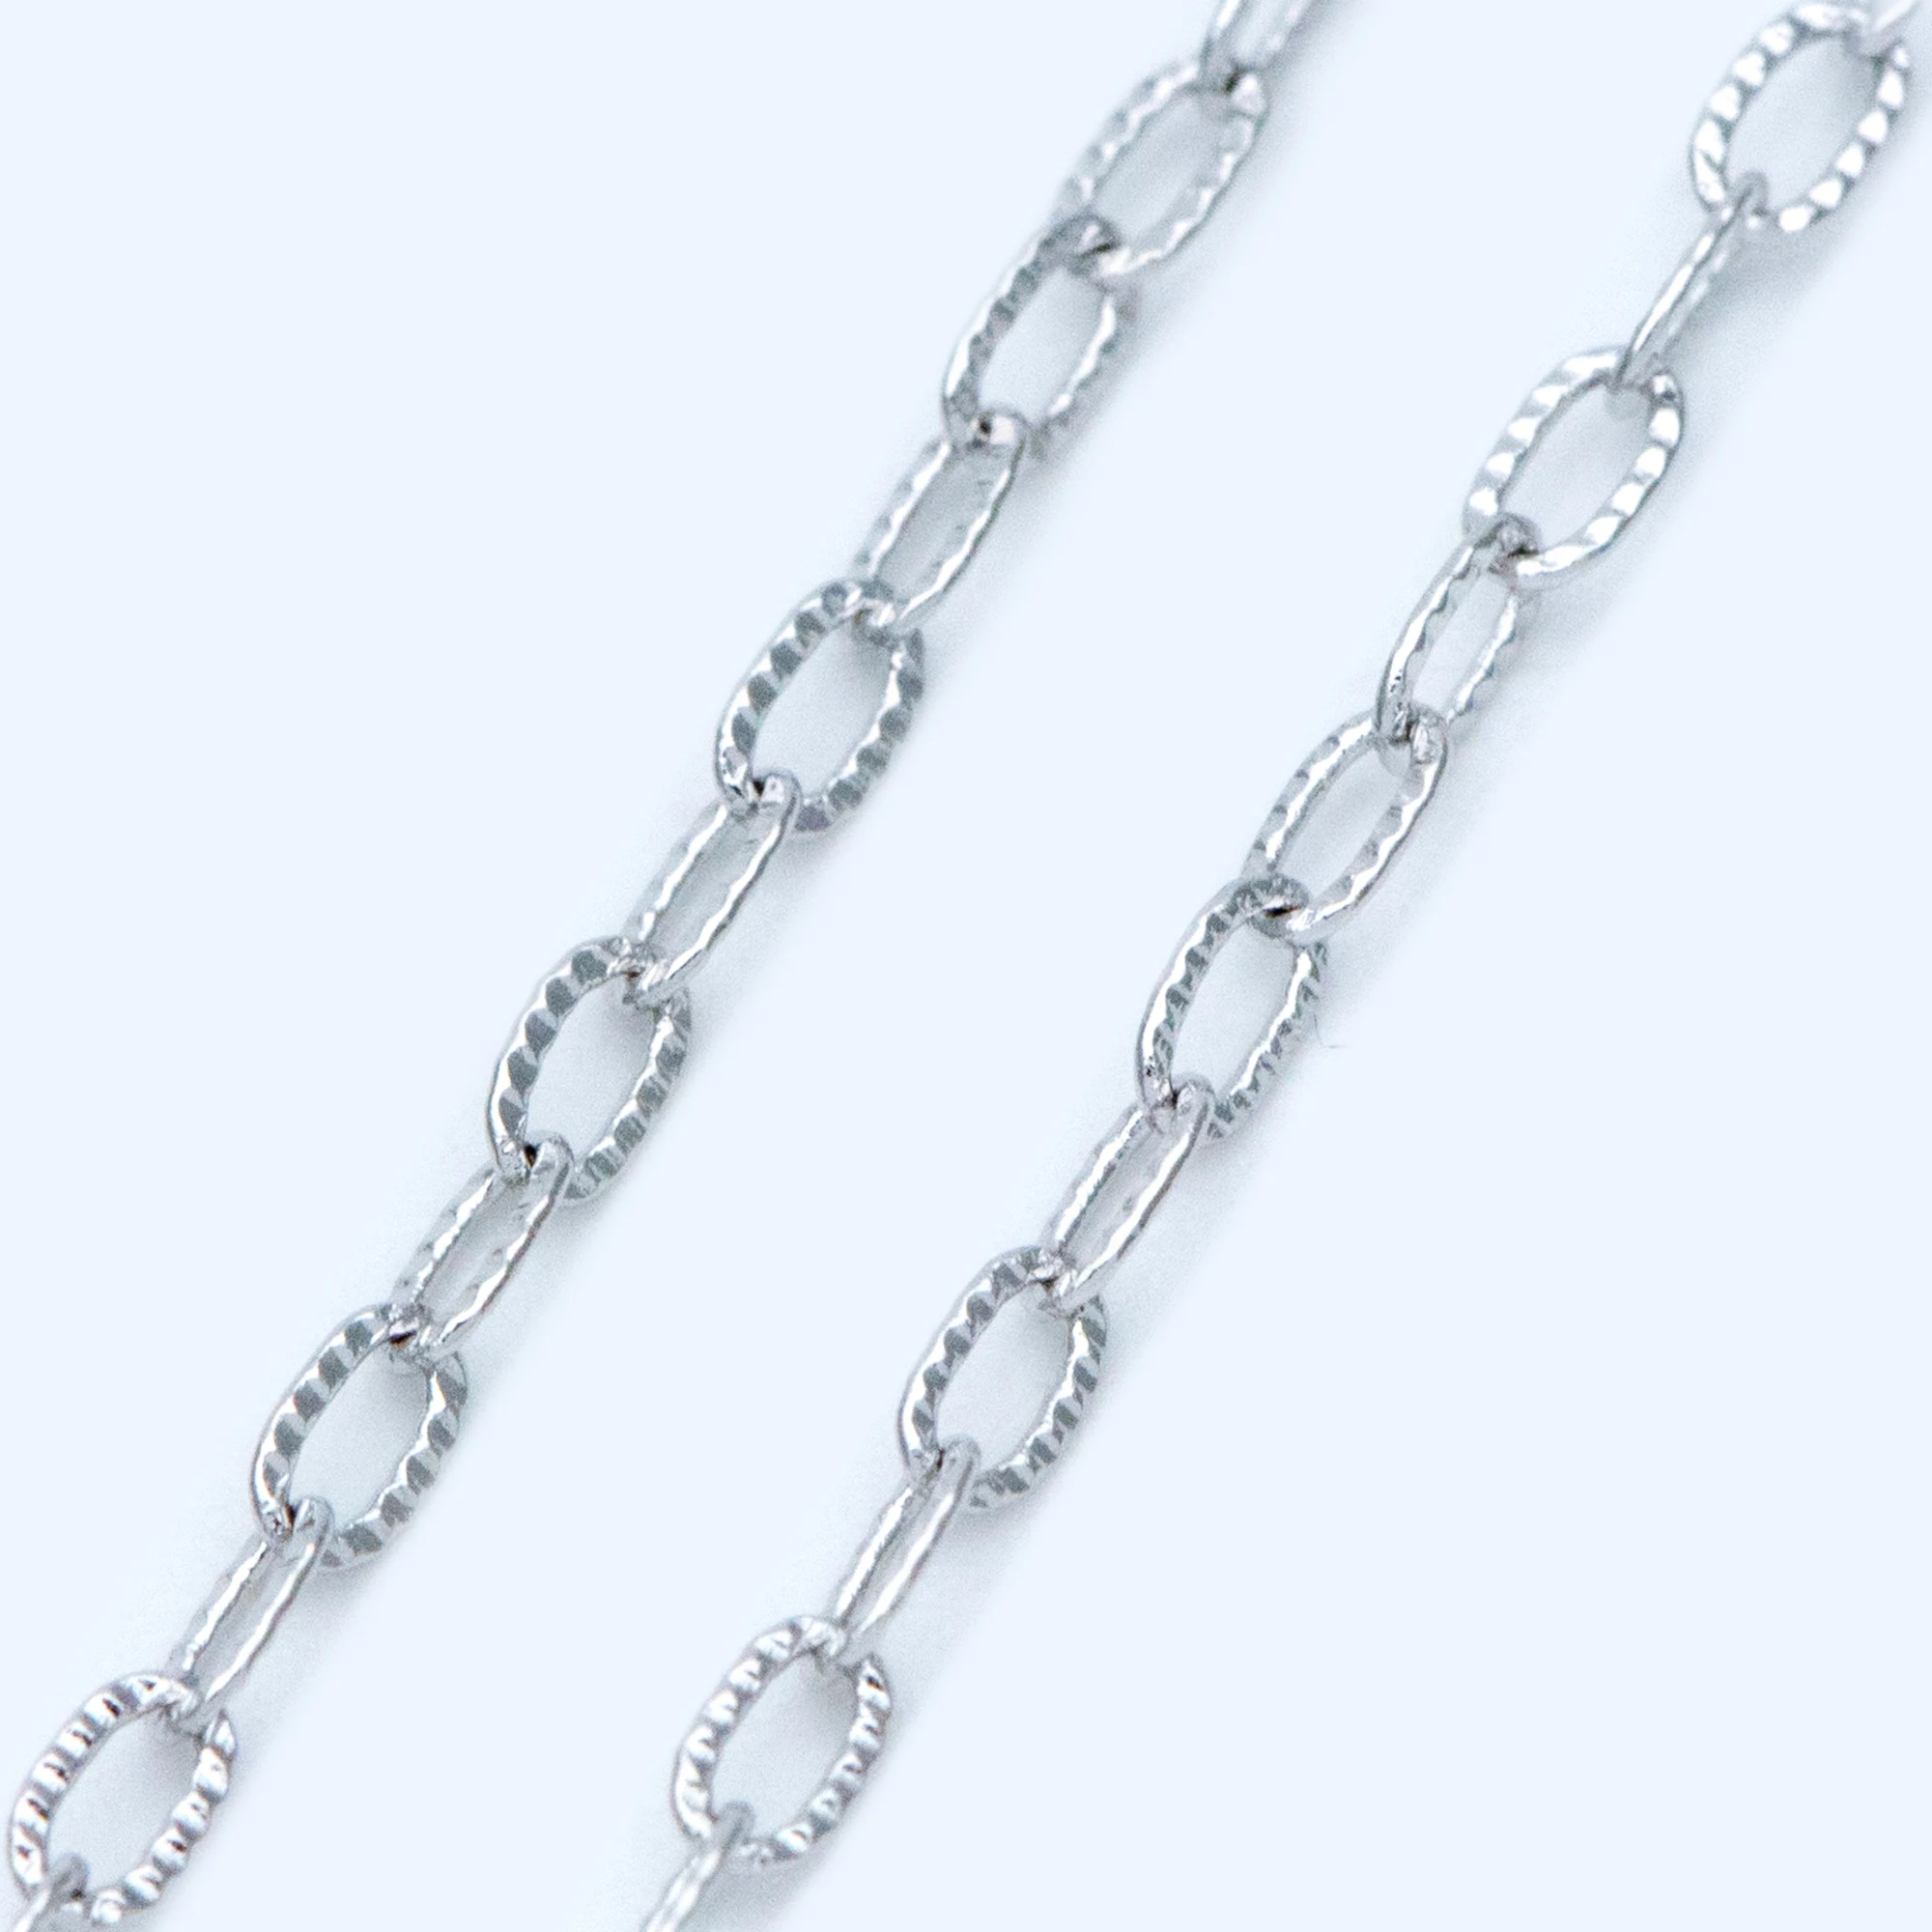 Silver tone Oval Chains, Link Size 2.2x3.7mm, Rhodium plated Brass Cable Chains, Craft DIY Necklace Findings (#LK-361)/ 1 Meter